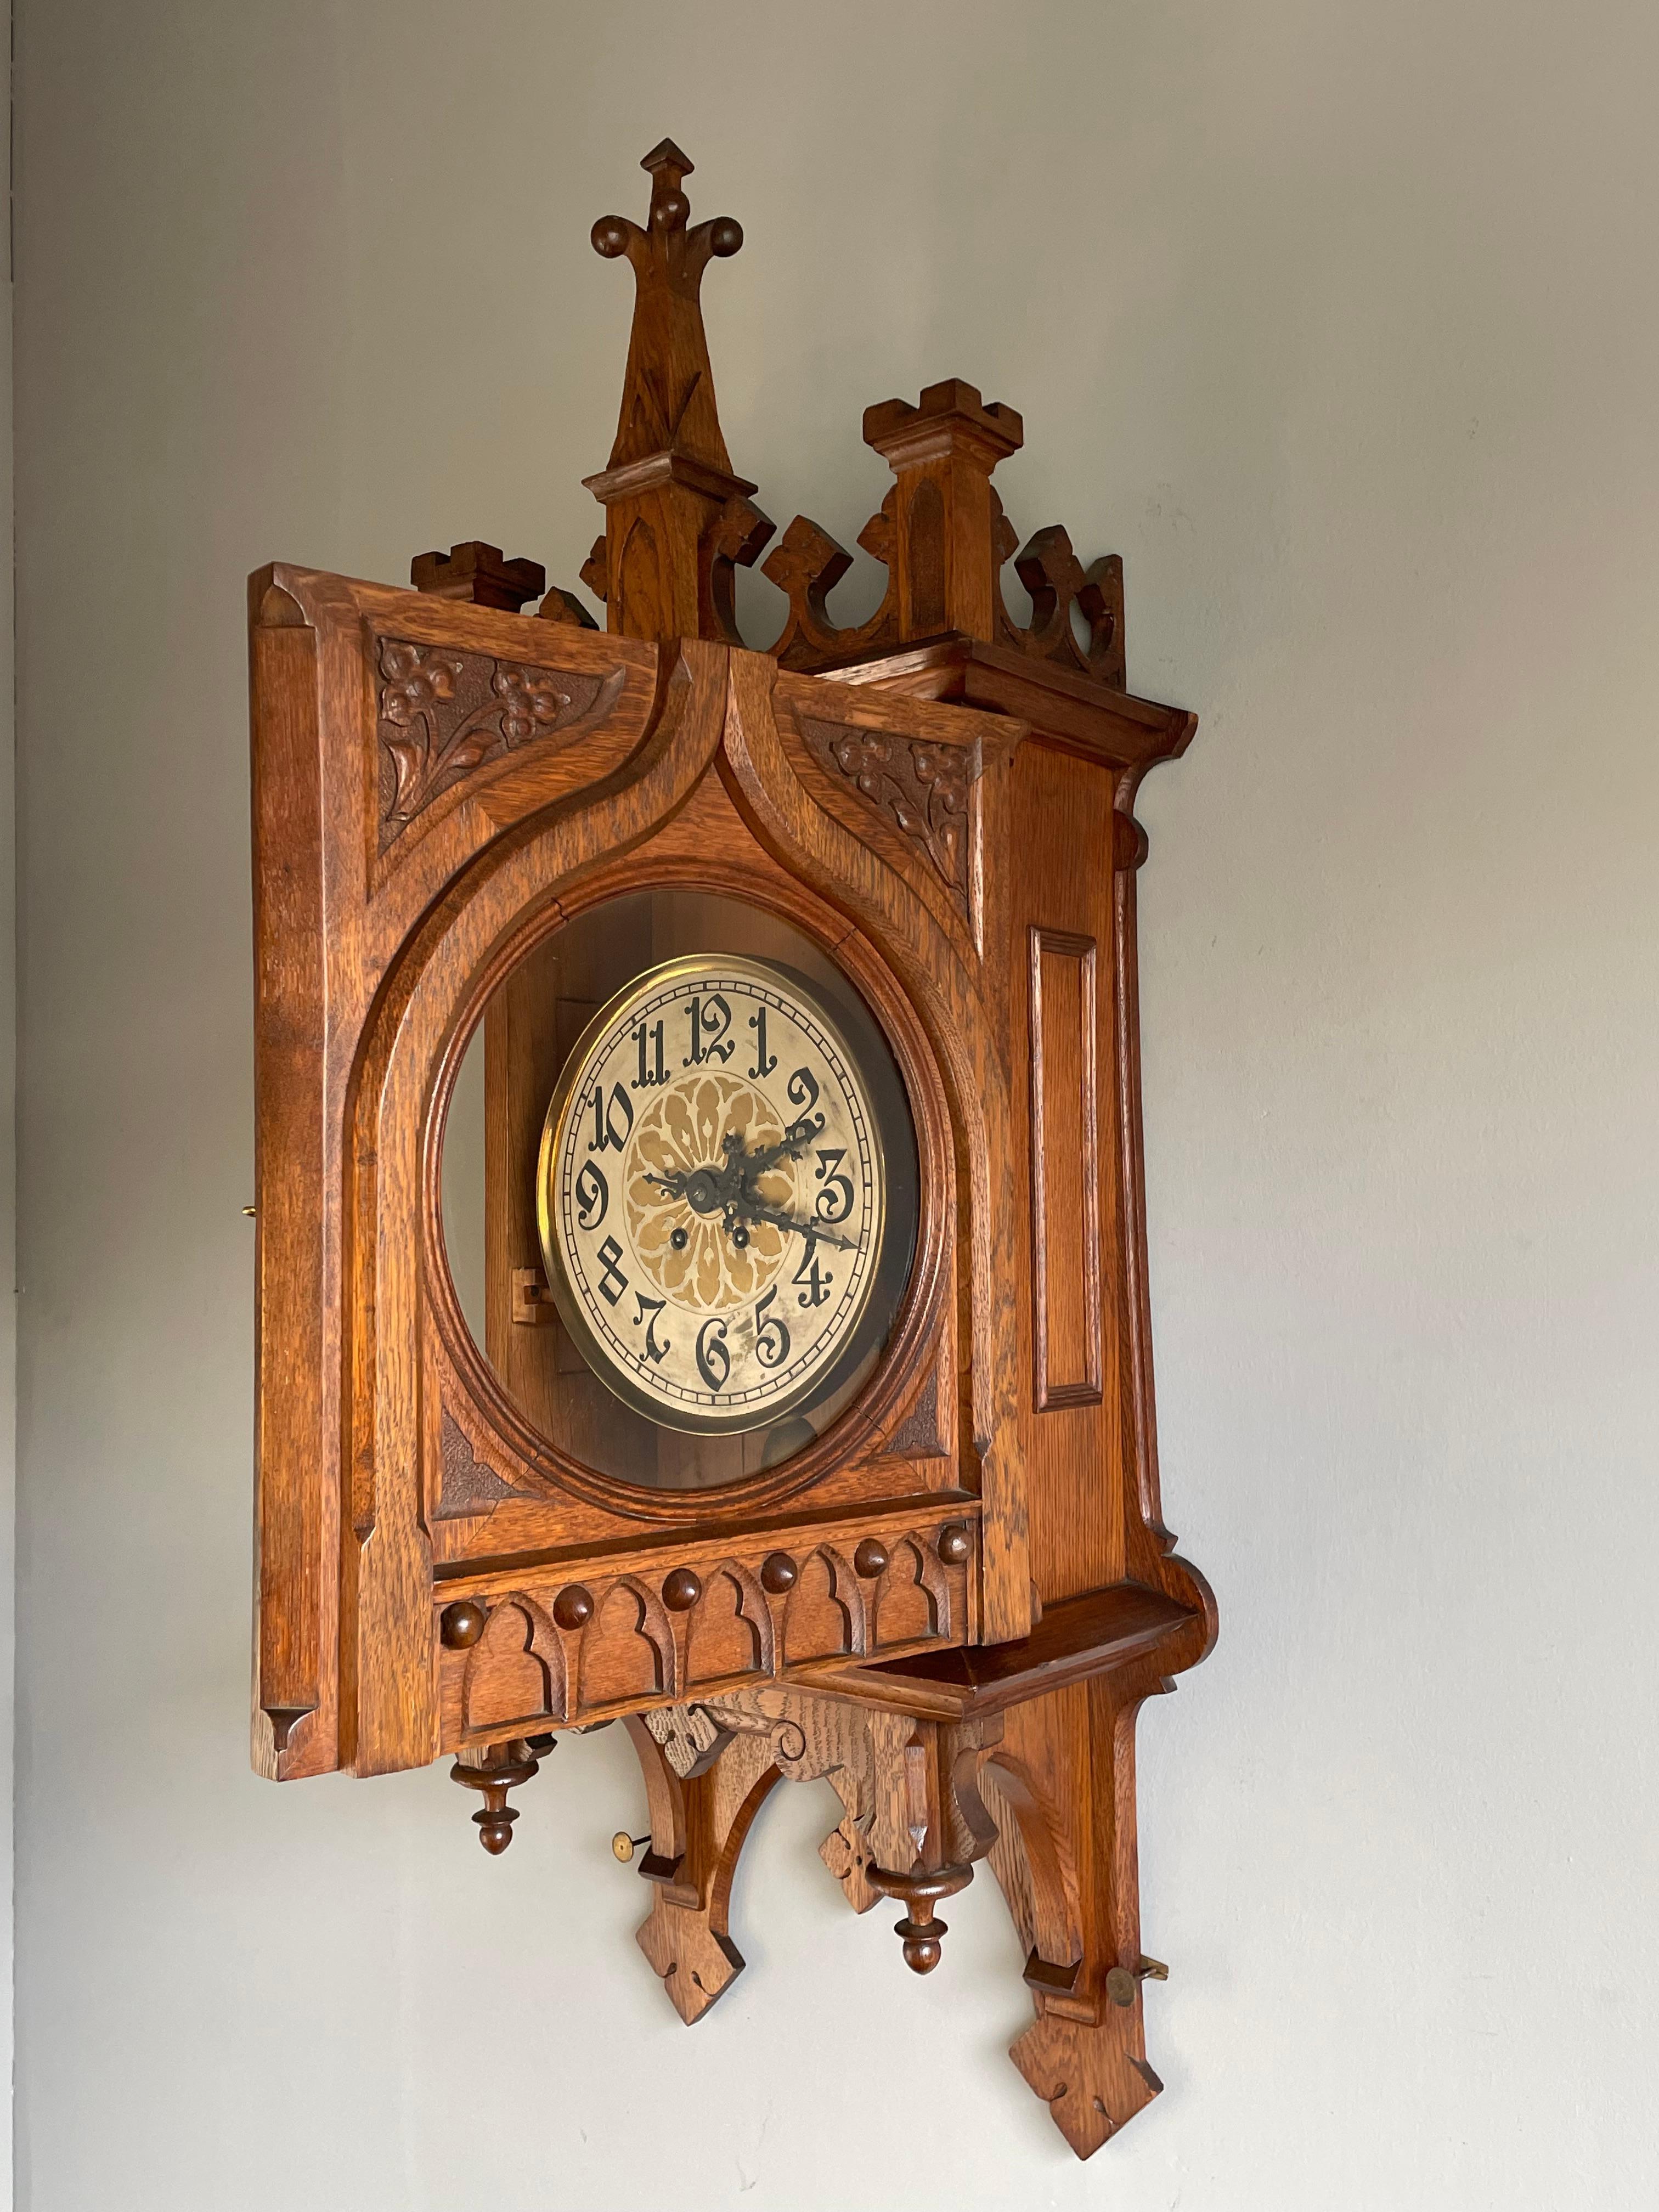 Rare & Large Antique Hand Carved Gothic Revival Wall Clock w. Lenzkirch Movement For Sale 6